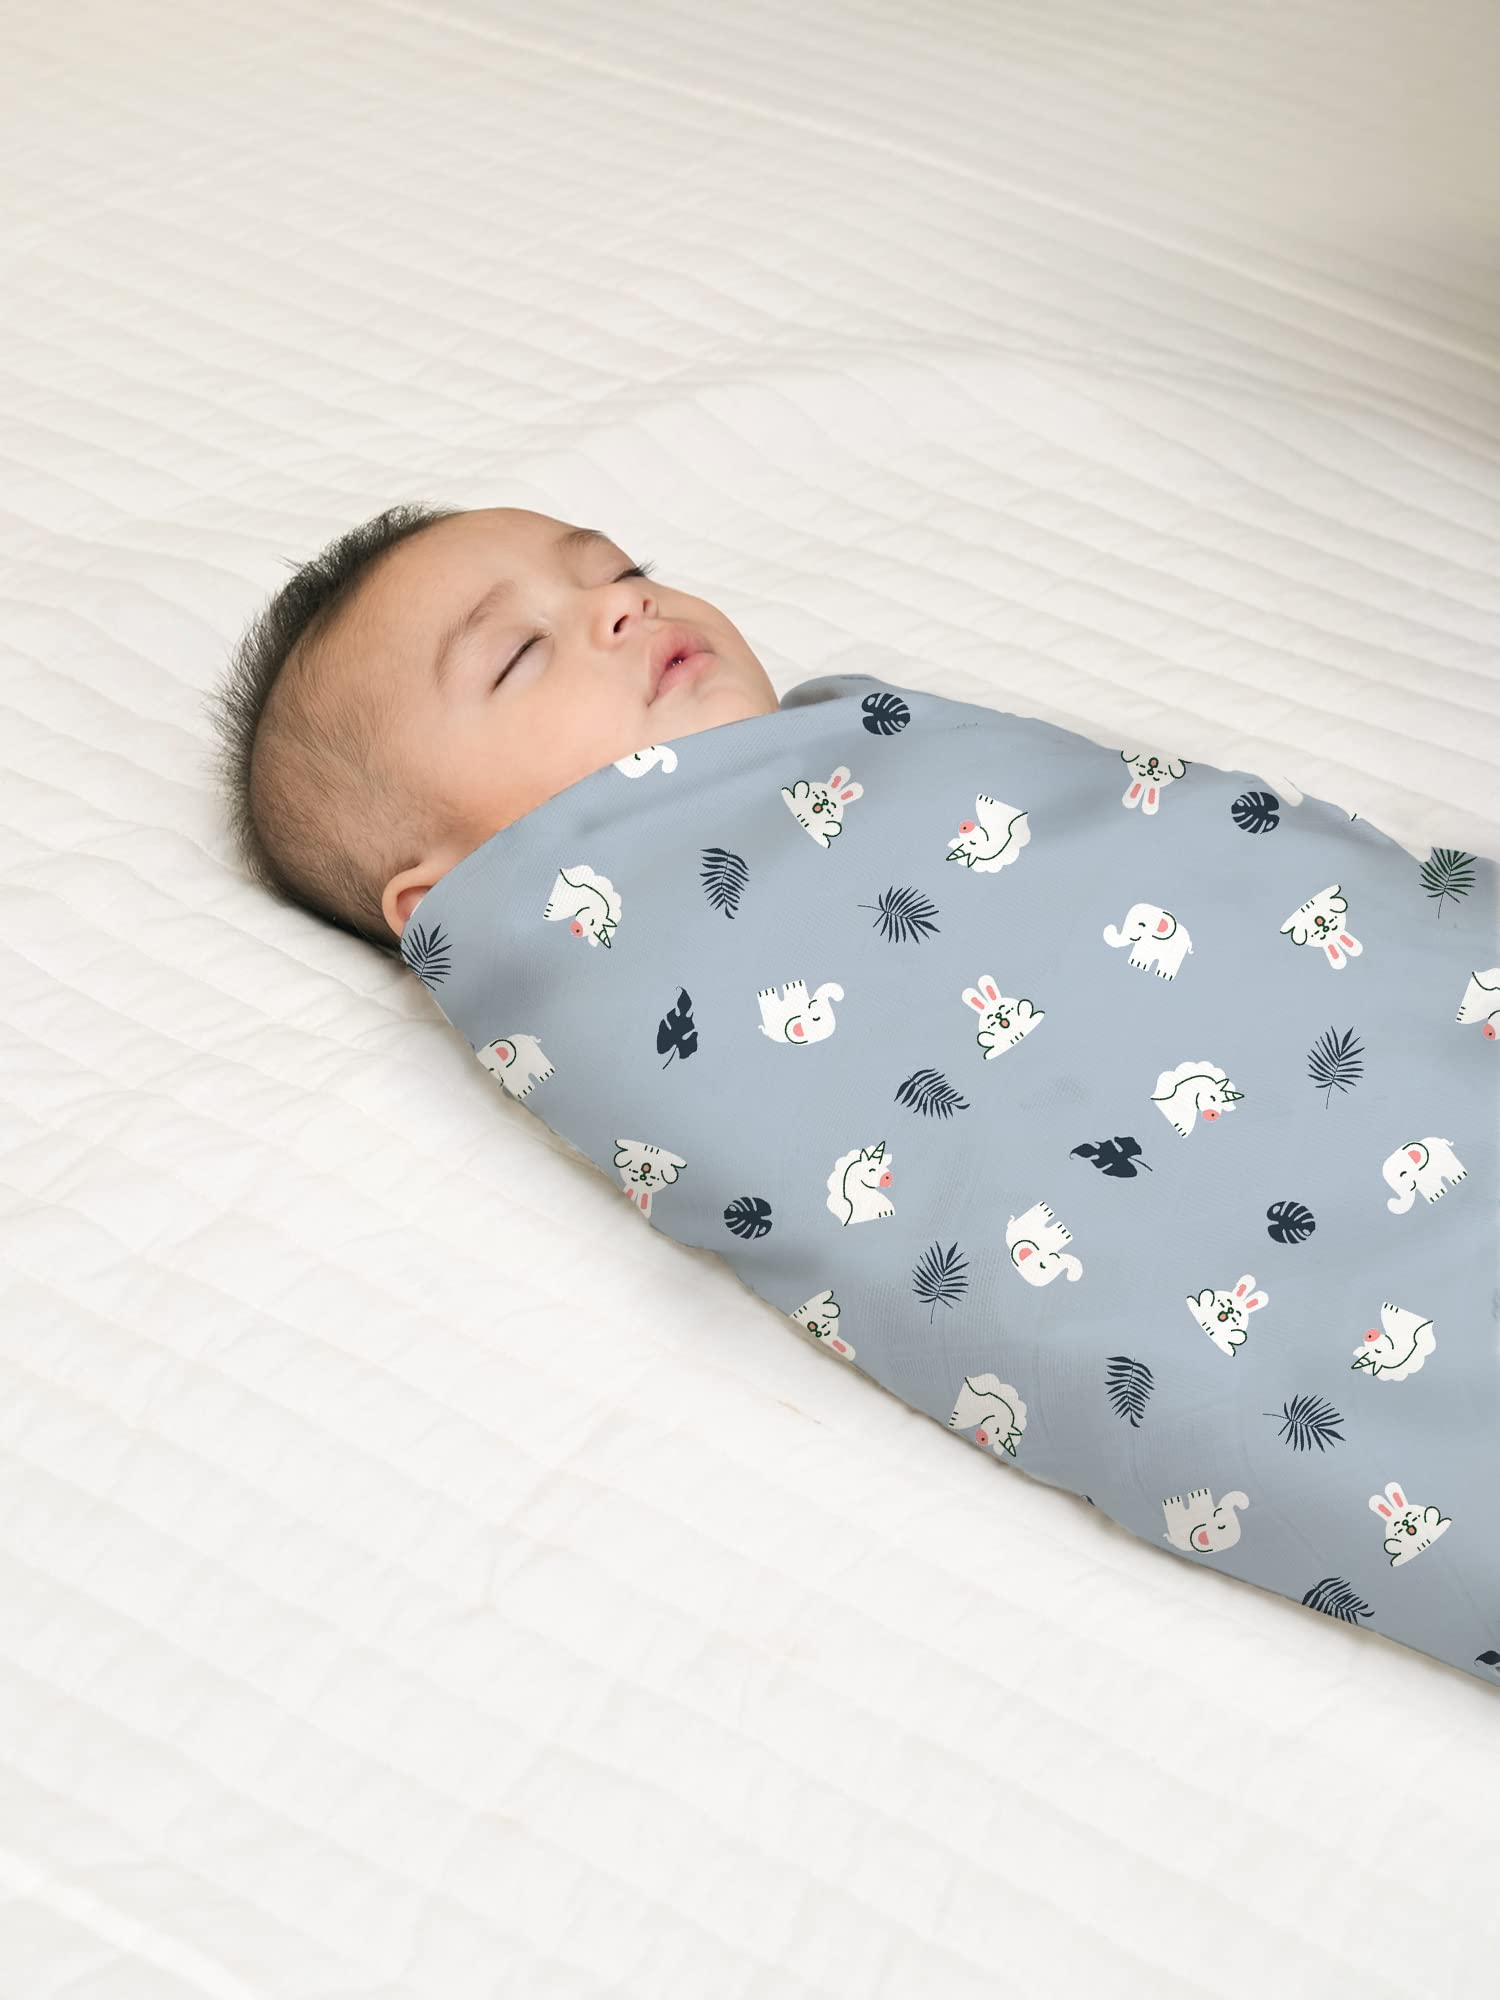 Mush 100% Bamboo Swaddle : Ultra Soft, Breathable, Thermoregulating, Absorbent, Light Weight and Multipurpose Bamboo Wrapper / Baby Bath Towel / Blanket (1, Rabbit Blue)